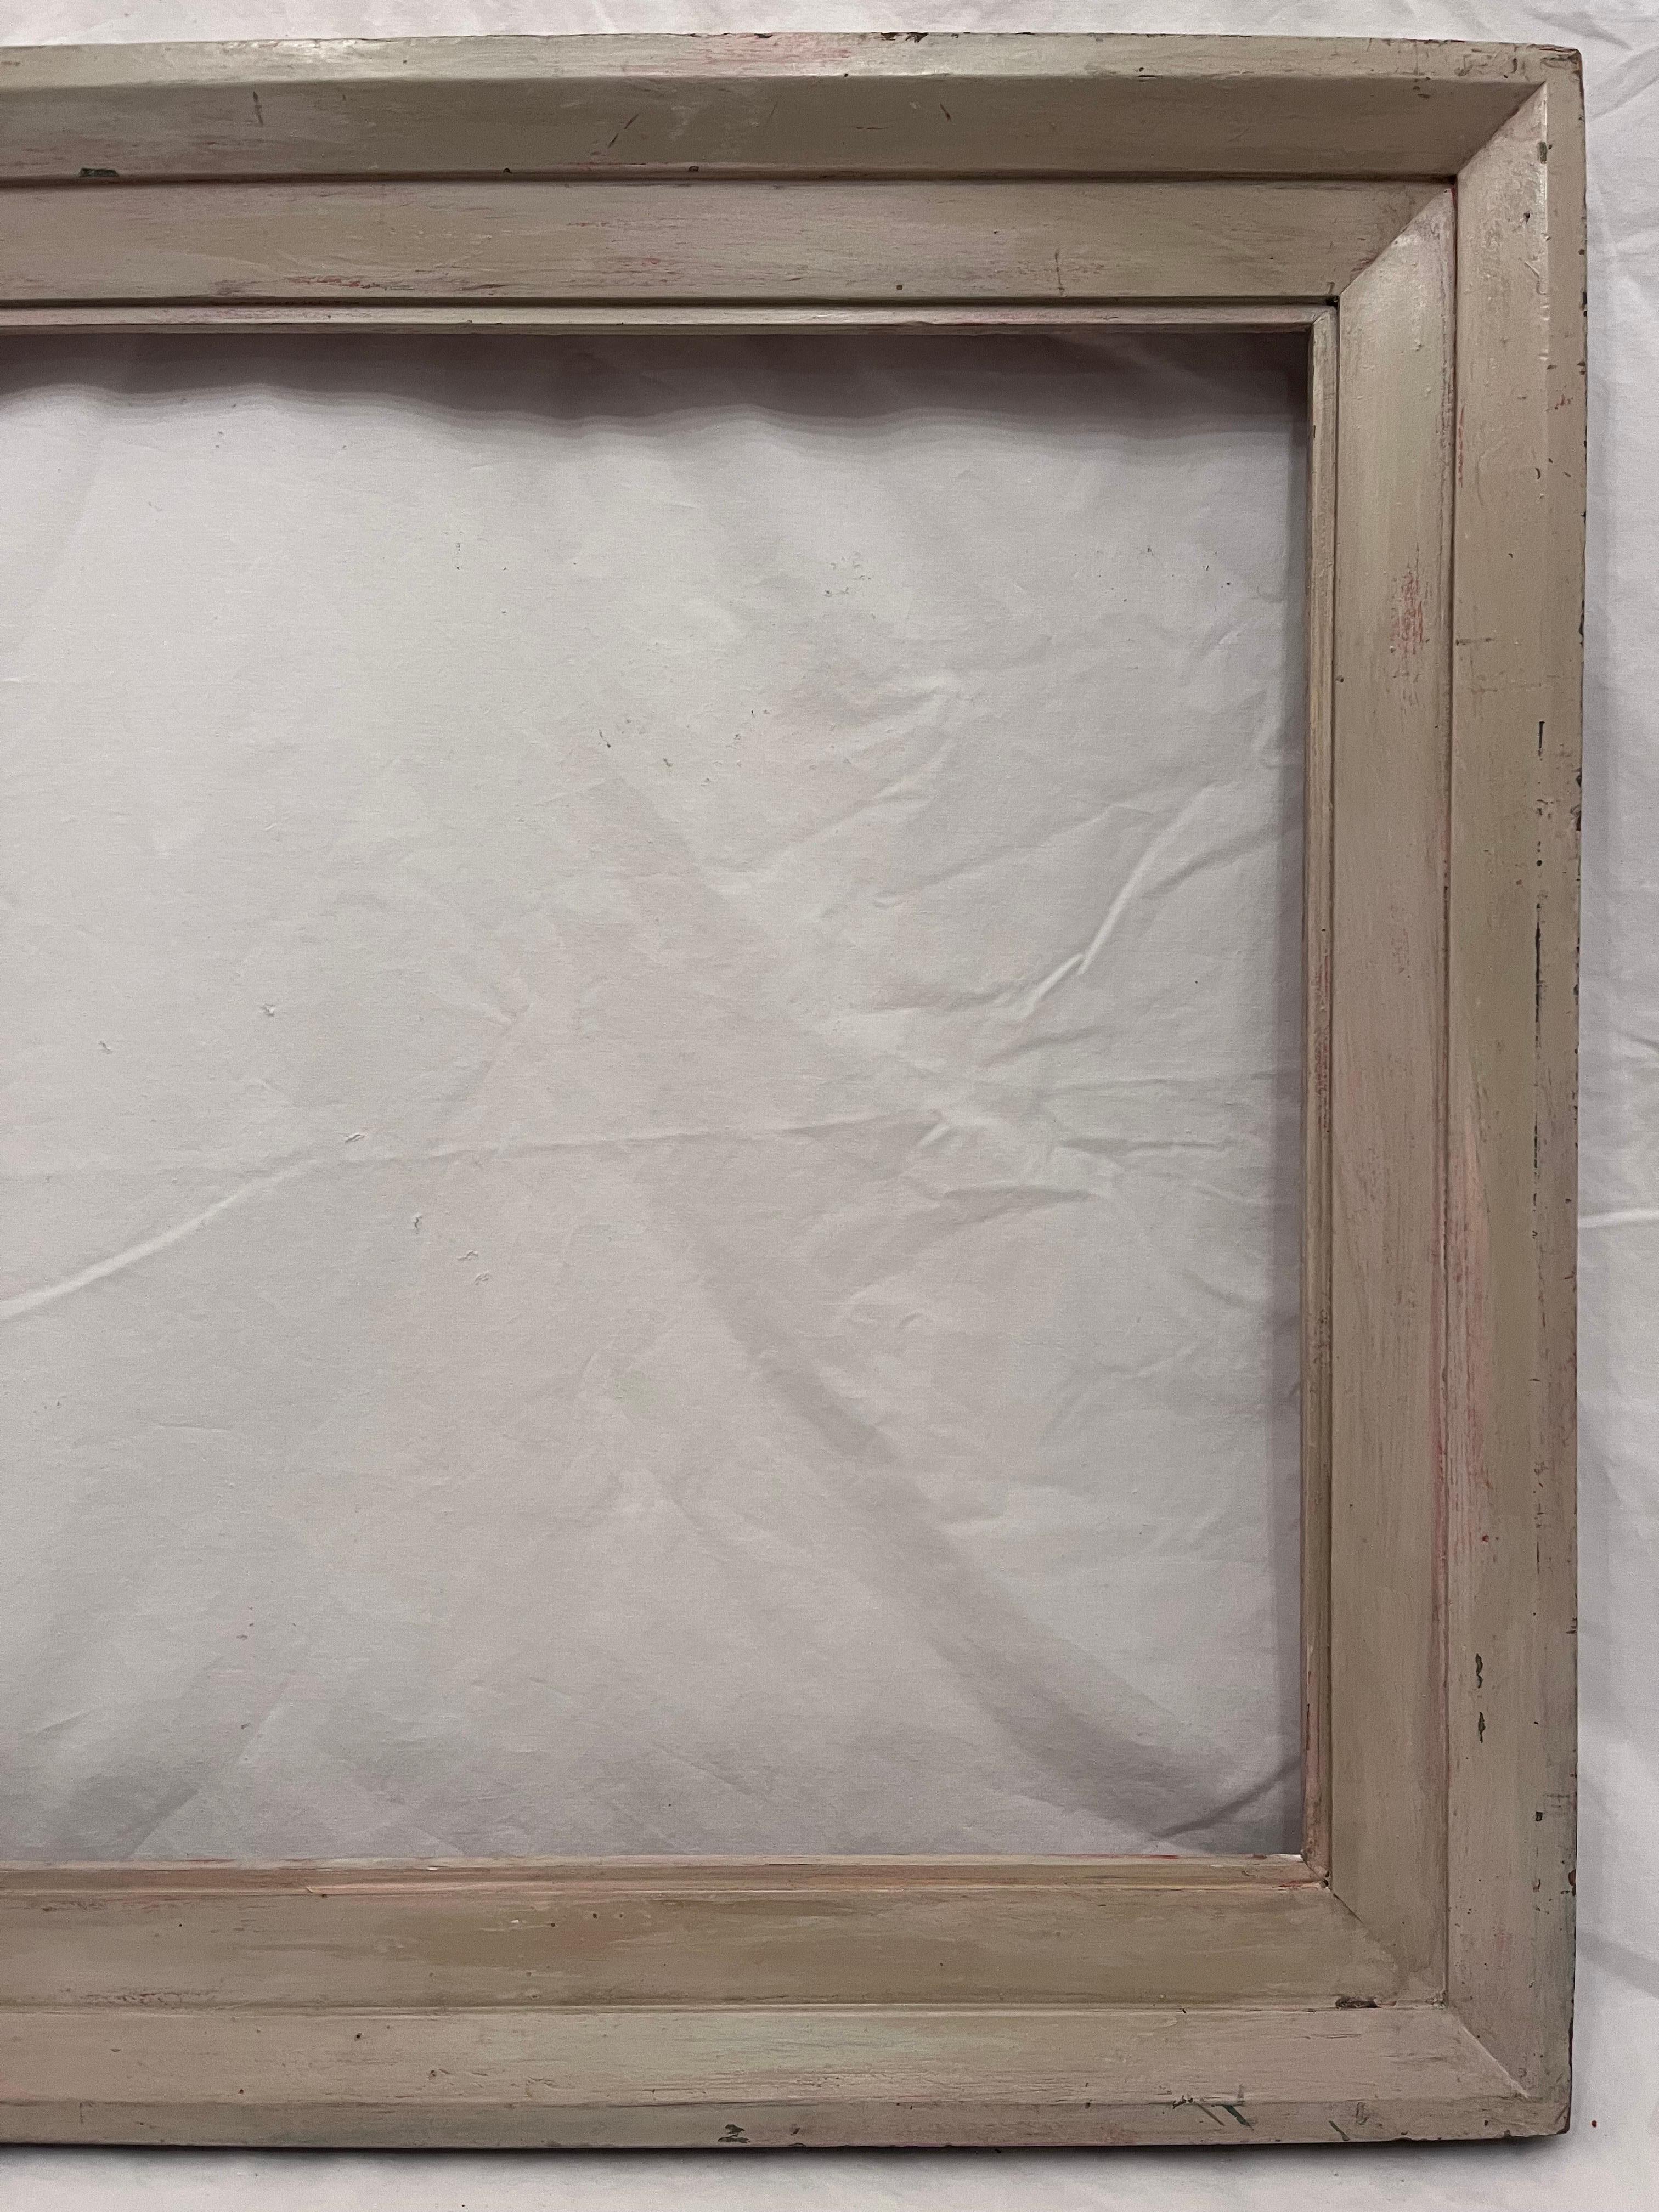 Wood Mid 20th Century American Modernist Style White Finish Picture Frame 24 x 20 For Sale